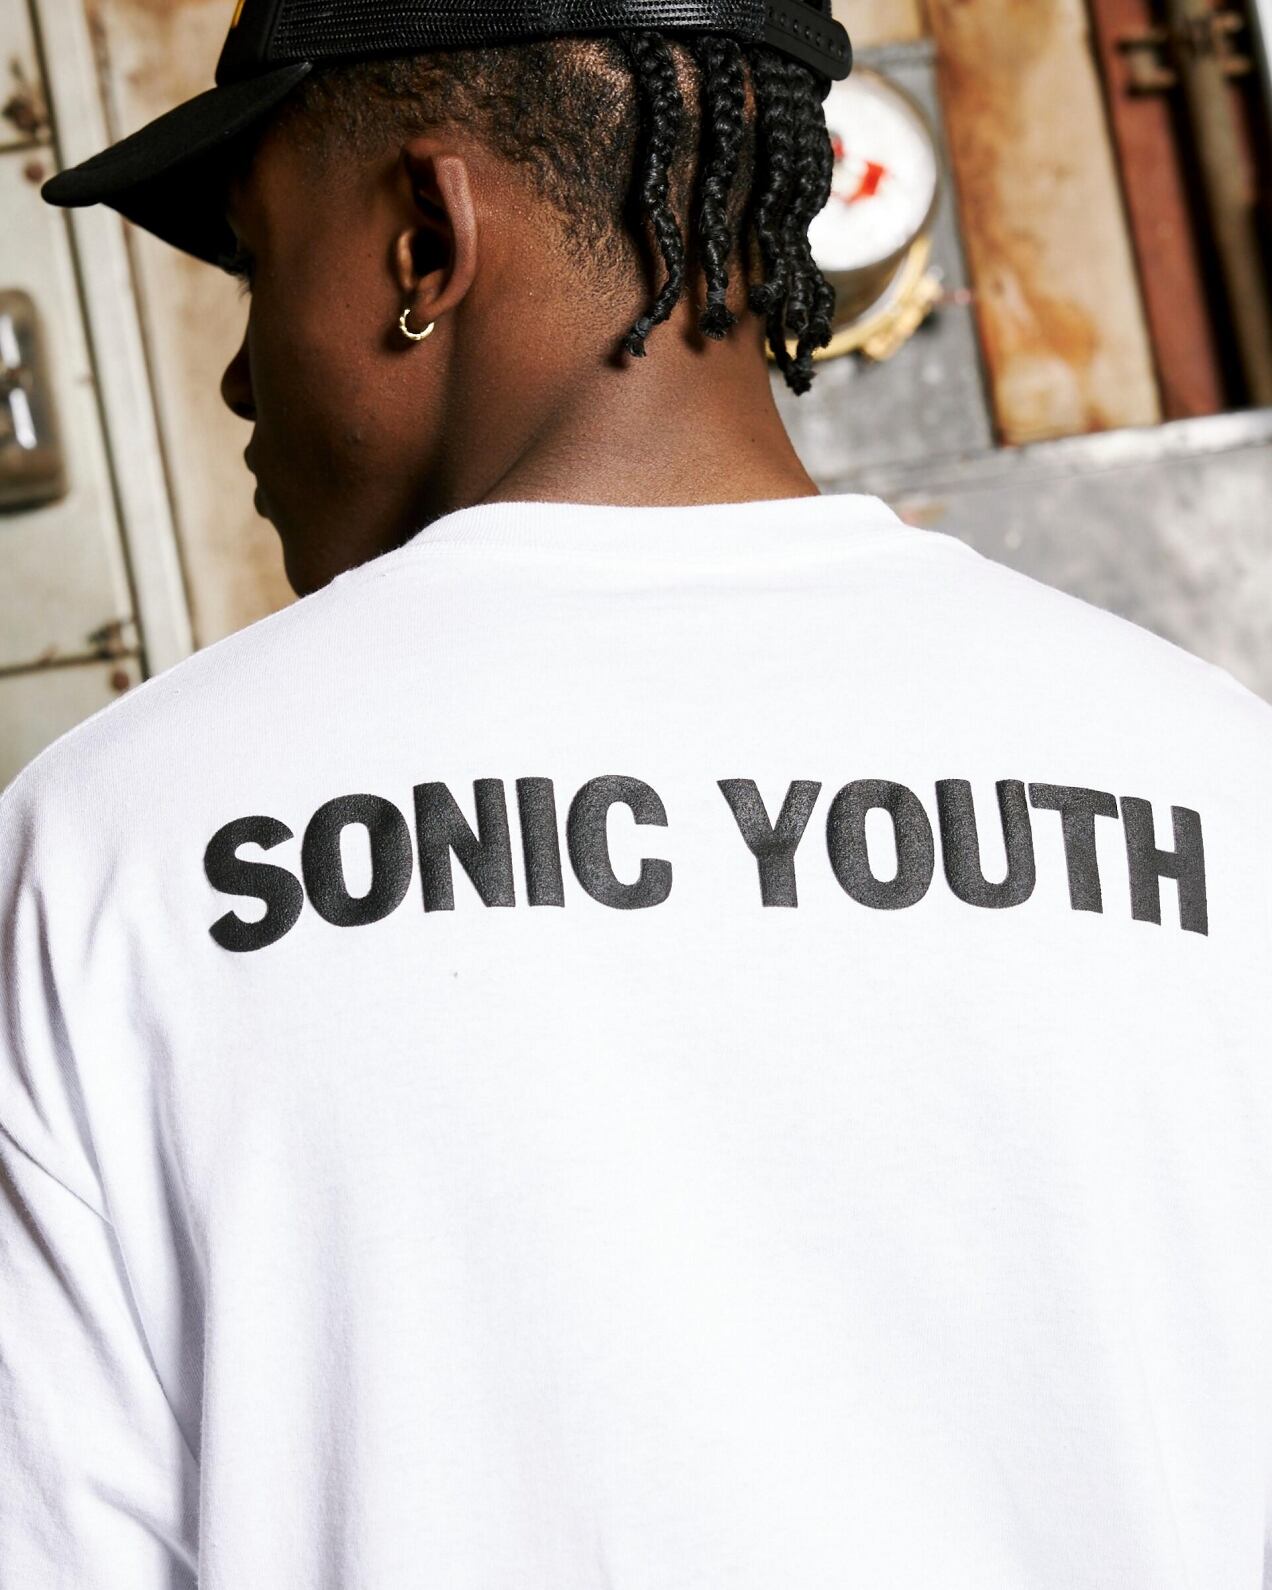 【PLEASURES/プレジャーズ×Sonic Youth/ソニック・ユース】STAR POWER T-SHIRT Tシャツ / WHITE /  11637 | AnKnOWn LAB powered by BASE